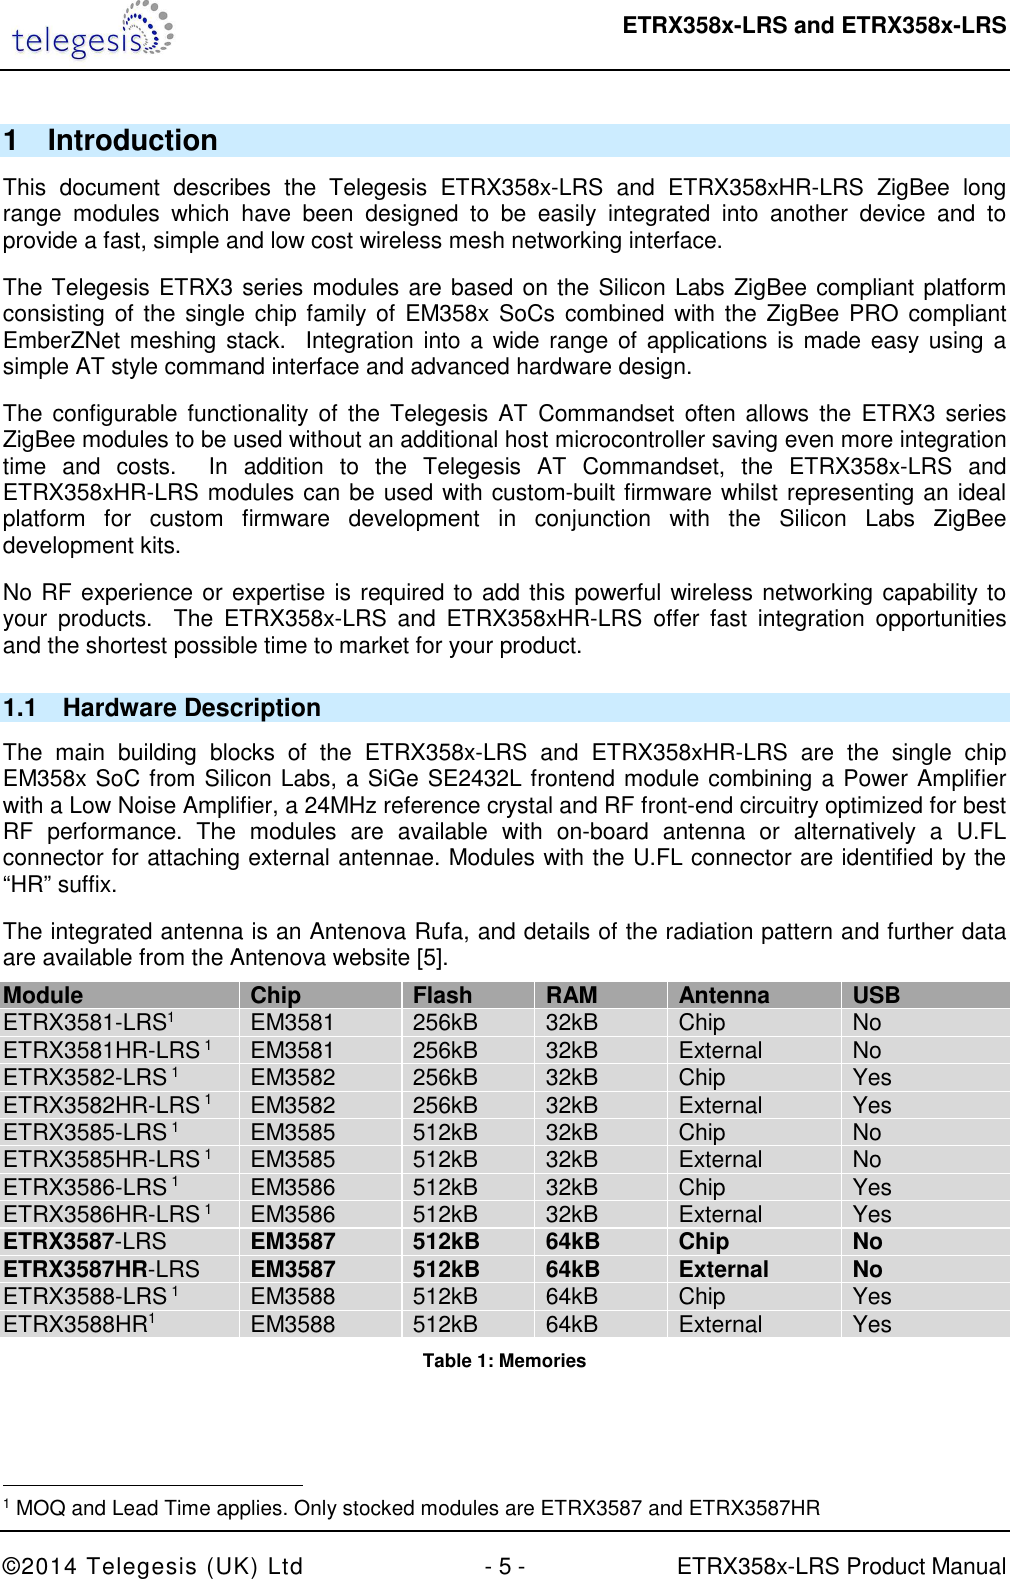  ETRX358x-LRS and ETRX358x-LRS  ©2014 Telegesis (UK) Ltd  - 5 -  ETRX358x-LRS Product Manual 1  Introduction This  document  describes  the  Telegesis  ETRX358x-LRS  and  ETRX358xHR-LRS  ZigBee  long range  modules  which  have  been  designed  to  be  easily  integrated  into  another  device  and  to provide a fast, simple and low cost wireless mesh networking interface. The Telegesis ETRX3 series modules are based on the Silicon Labs ZigBee compliant platform consisting of the single chip family of EM358x SoCs combined with the ZigBee PRO compliant EmberZNet meshing stack.  Integration into a wide range of applications  is made easy using a simple AT style command interface and advanced hardware design. The  configurable functionality  of the  Telegesis AT  Commandset  often allows  the ETRX3  series ZigBee modules to be used without an additional host microcontroller saving even more integration time  and  costs.    In  addition  to  the  Telegesis  AT  Commandset,  the  ETRX358x-LRS  and ETRX358xHR-LRS modules can be used with custom-built firmware whilst representing an ideal platform  for  custom  firmware  development  in  conjunction  with  the  Silicon  Labs  ZigBee development kits. No RF experience or expertise is required to add this powerful wireless networking capability to your  products.    The  ETRX358x-LRS  and  ETRX358xHR-LRS  offer  fast  integration  opportunities and the shortest possible time to market for your product. 1.1  Hardware Description The  main  building  blocks  of  the  ETRX358x-LRS  and  ETRX358xHR-LRS  are  the  single  chip EM358x SoC from Silicon Labs, a SiGe SE2432L frontend module combining a Power Amplifier with a Low Noise Amplifier, a 24MHz reference crystal and RF front-end circuitry optimized for best RF  performance.  The  modules  are  available  with  on-board  antenna  or  alternatively  a  U.FL connector for attaching external antennae. Modules with the U.FL connector are identified by the “HR” suffix. The integrated antenna is an Antenova Rufa, and details of the radiation pattern and further data are available from the Antenova website [5]. Module Chip Flash RAM Antenna USB ETRX3581-LRS1  EM3581  256kB  32kB  Chip  No ETRX3581HR-LRS 1  EM3581  256kB  32kB  External  No ETRX3582-LRS 1  EM3582  256kB  32kB  Chip  Yes ETRX3582HR-LRS 1  EM3582  256kB  32kB  External  Yes ETRX3585-LRS 1  EM3585  512kB  32kB  Chip  No ETRX3585HR-LRS 1  EM3585  512kB  32kB  External  No ETRX3586-LRS 1  EM3586  512kB  32kB  Chip  Yes ETRX3586HR-LRS 1  EM3586  512kB  32kB  External  Yes ETRX3587-LRS EM3587 512kB 64kB Chip No ETRX3587HR-LRS EM3587 512kB 64kB External No ETRX3588-LRS 1  EM3588  512kB  64kB  Chip  Yes ETRX3588HR1  EM3588  512kB  64kB  External  Yes Table 1: Memories                                                  1 MOQ and Lead Time applies. Only stocked modules are ETRX3587 and ETRX3587HR 